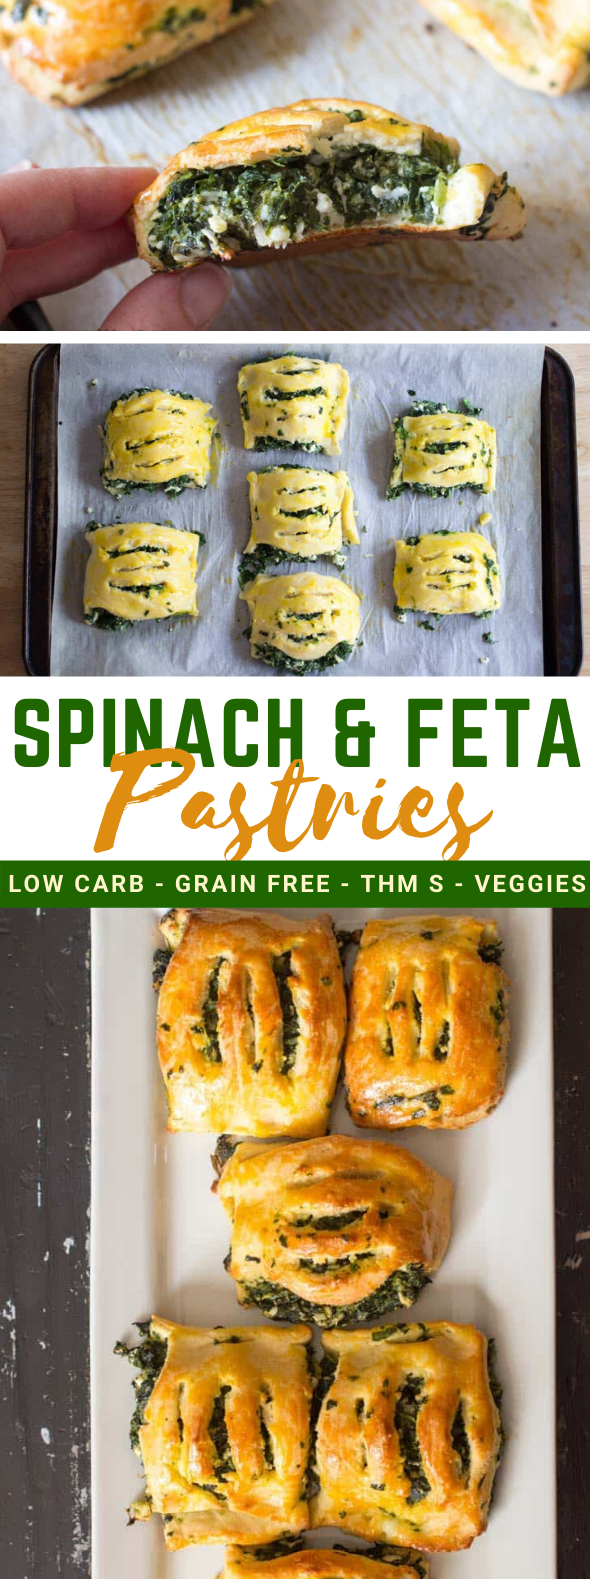 Spinach & Feta Pastries – Low Carb, Grain Free, THM S #healthy #vegetarian